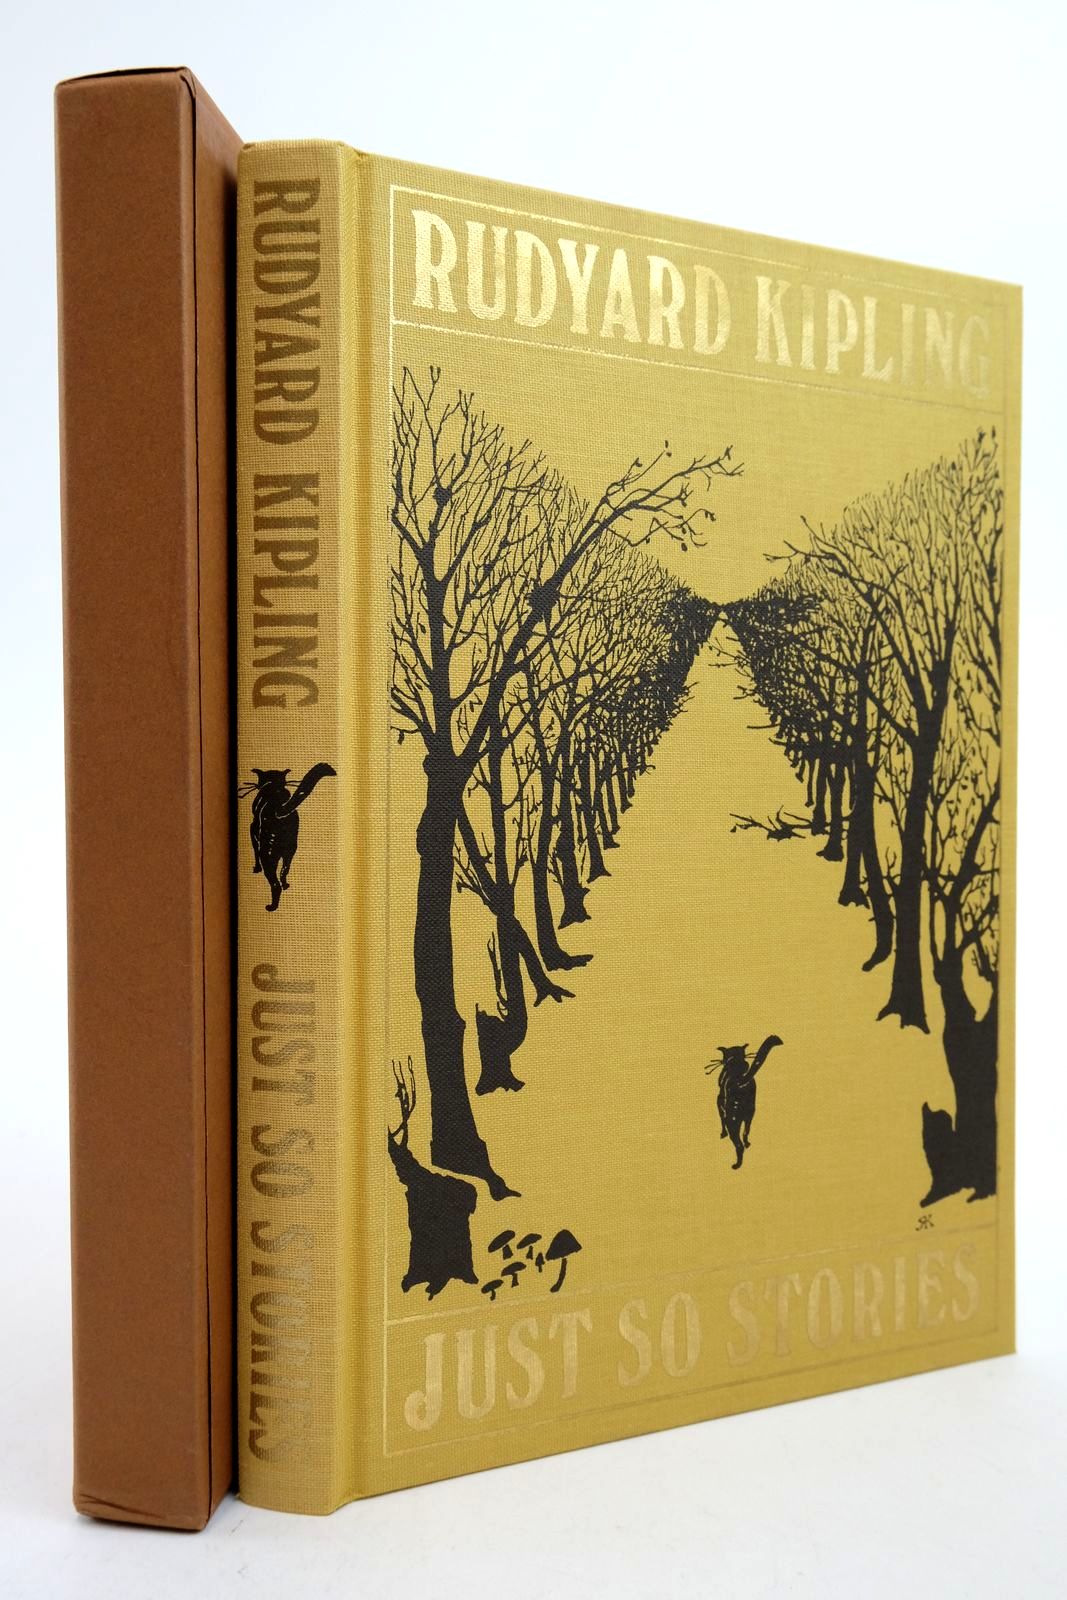 Photo of JUST SO STORIES written by Kipling, Rudyard illustrated by Kipling, Rudyard published by Folio Society (STOCK CODE: 2139472)  for sale by Stella & Rose's Books